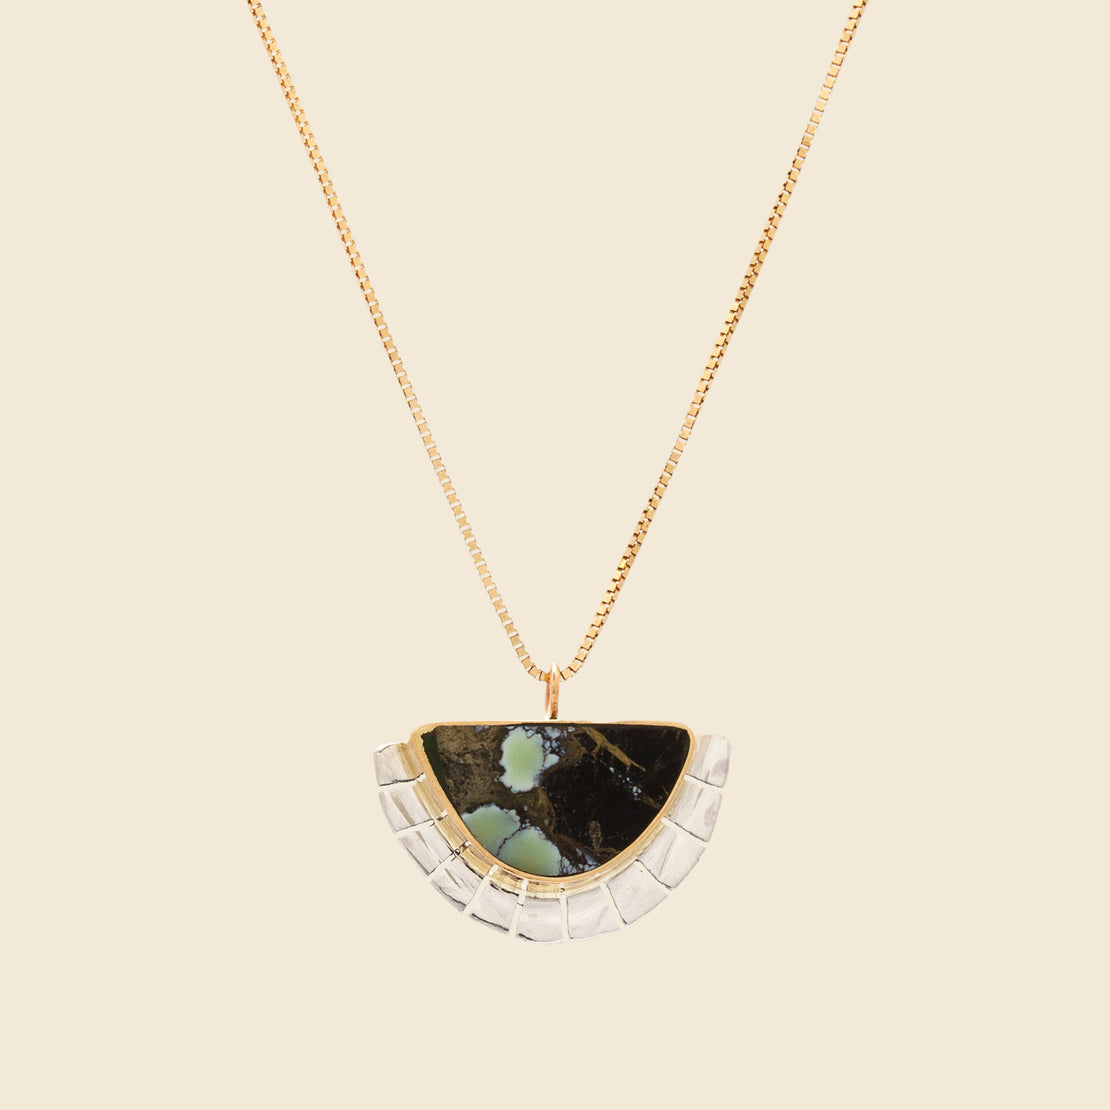 Young in the Mountains Selene Necklace - Colina Verde Variscite